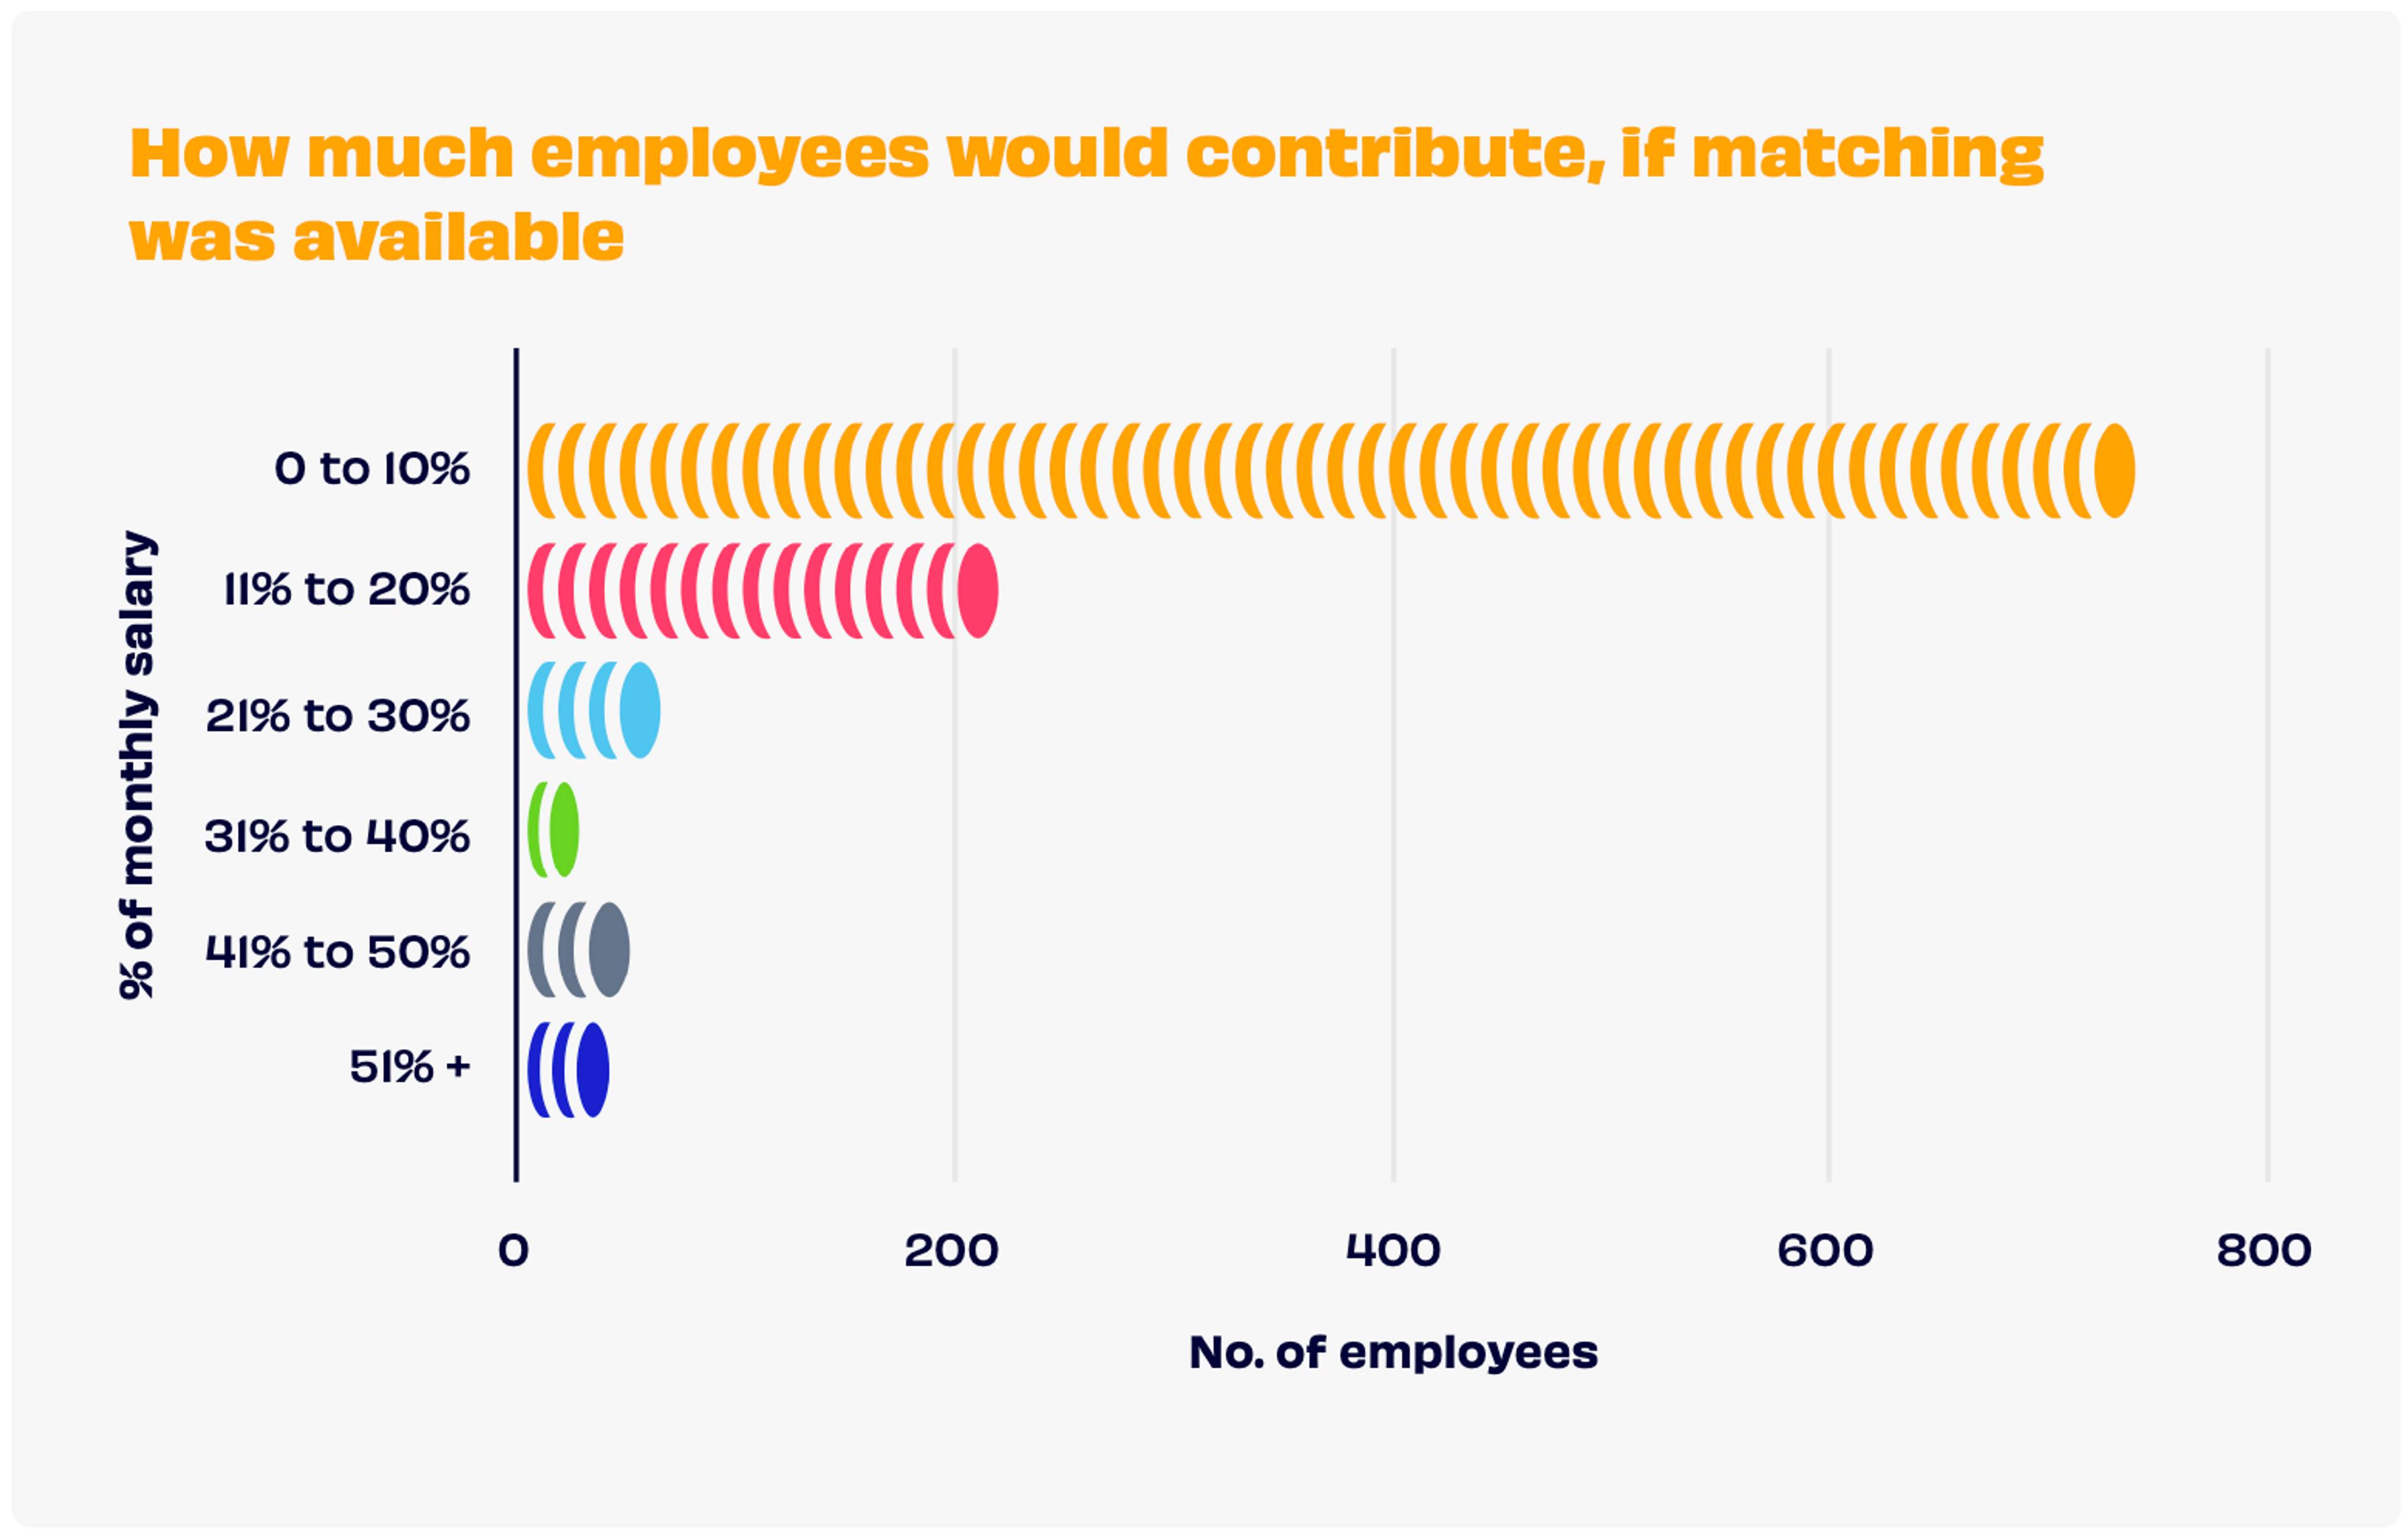 A bar chart showing how much employees would contribute if matching was available